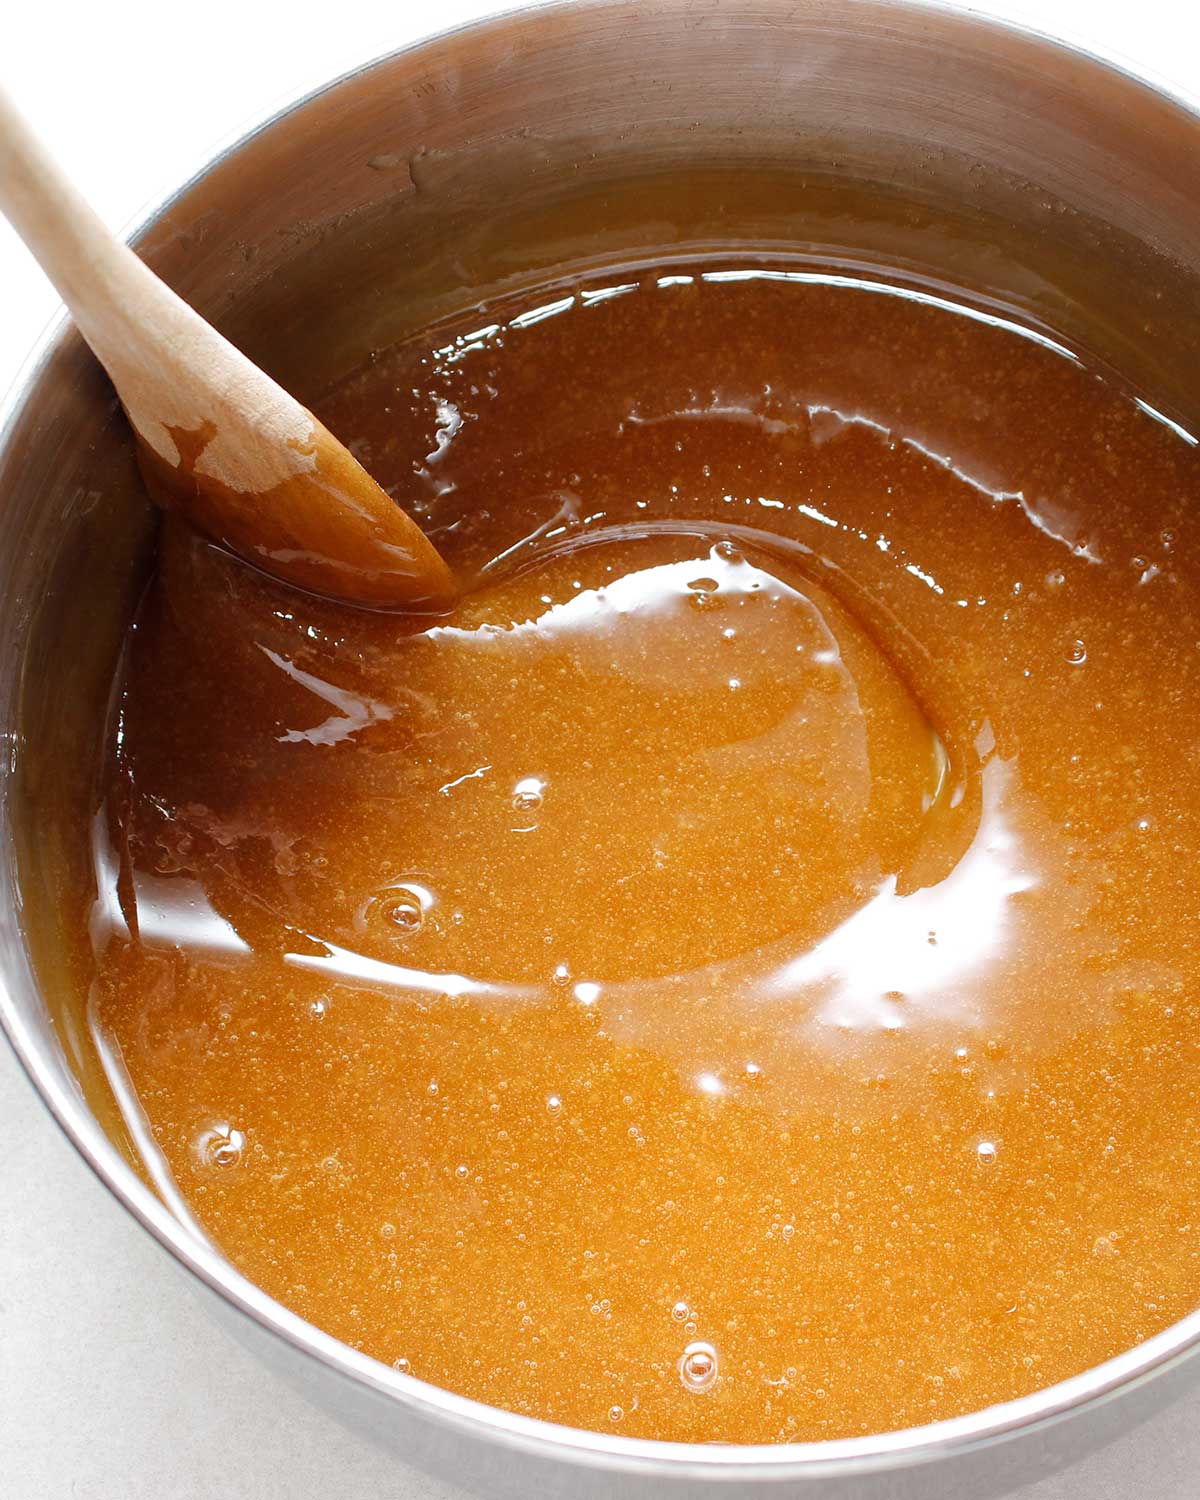 Stirring boiled maple syrup in a pot with wooden spoon.